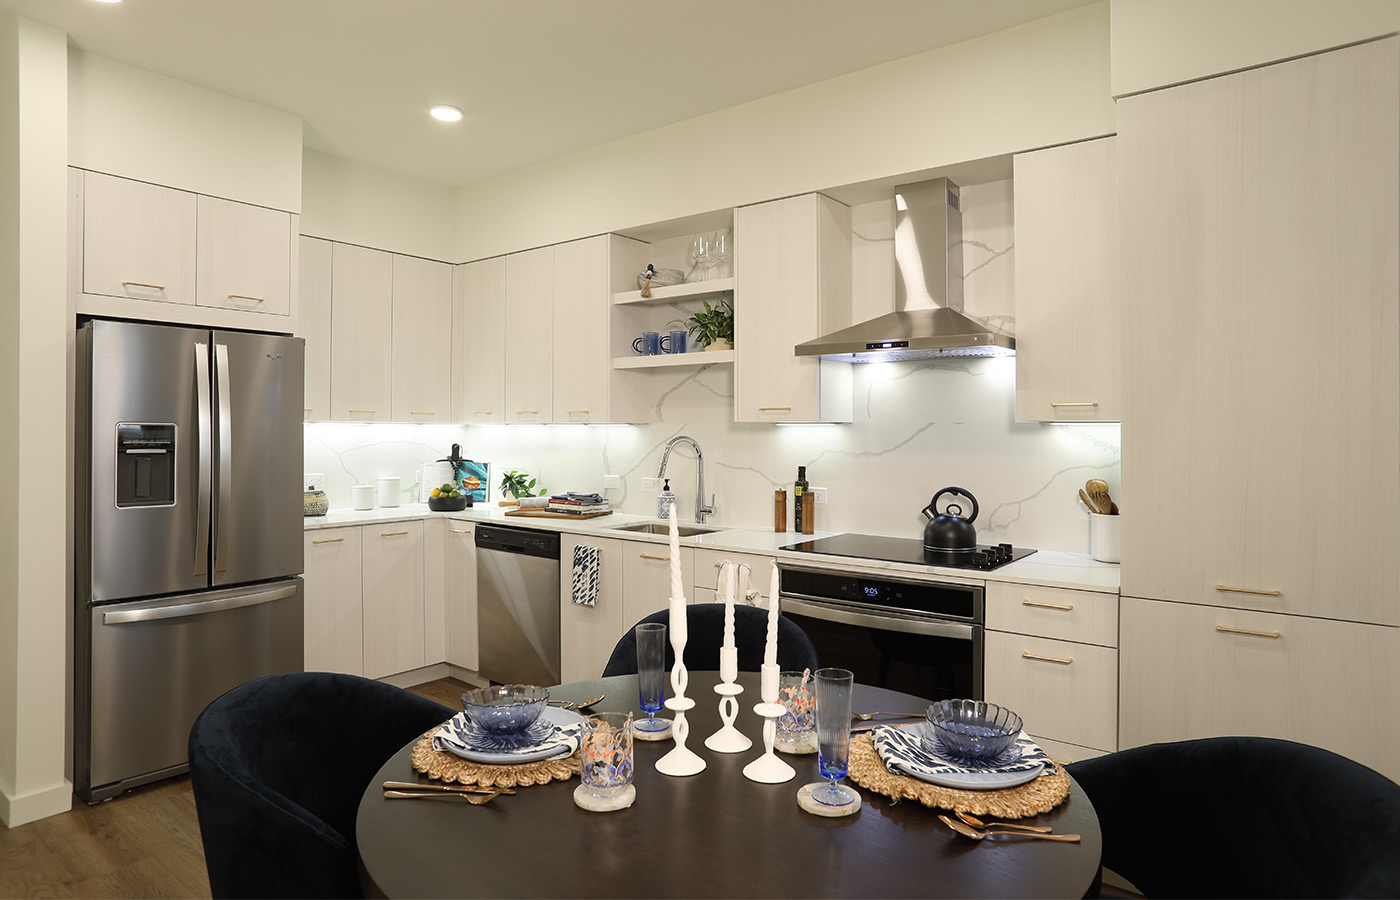 A fully furnished kitchen and dining room combo.